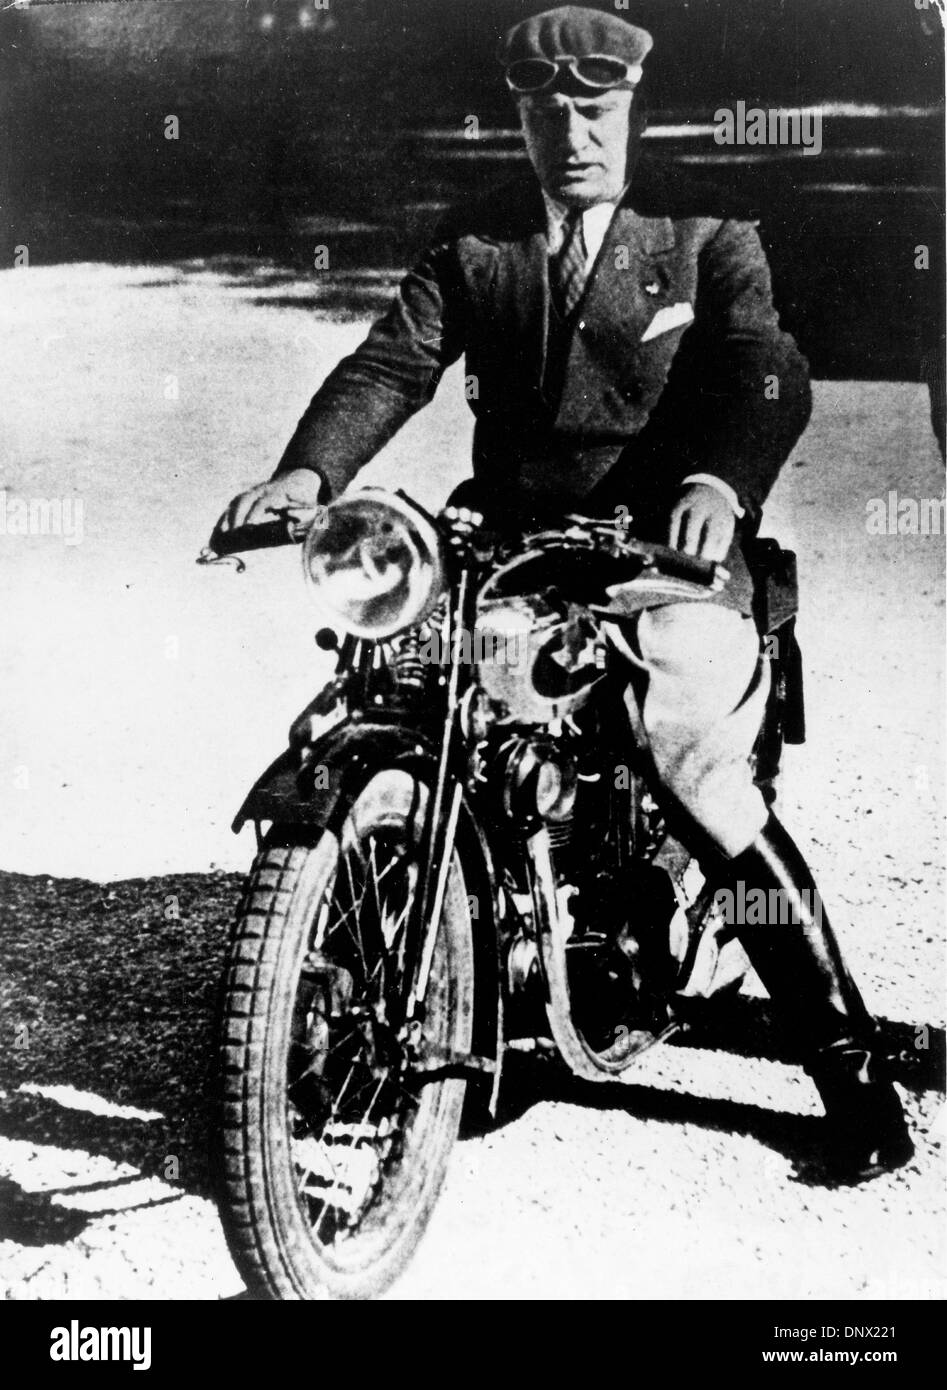 March 8, 1939 - Rome, Italy - BENITO MUSSOLINI (1883-1945) the Italian dictator and leader of the Fascist movement sitting on his motorcycle. (Credit Image: © KEYSTONE Pictures USA/ZUMAPRESS.com) Stock Photo